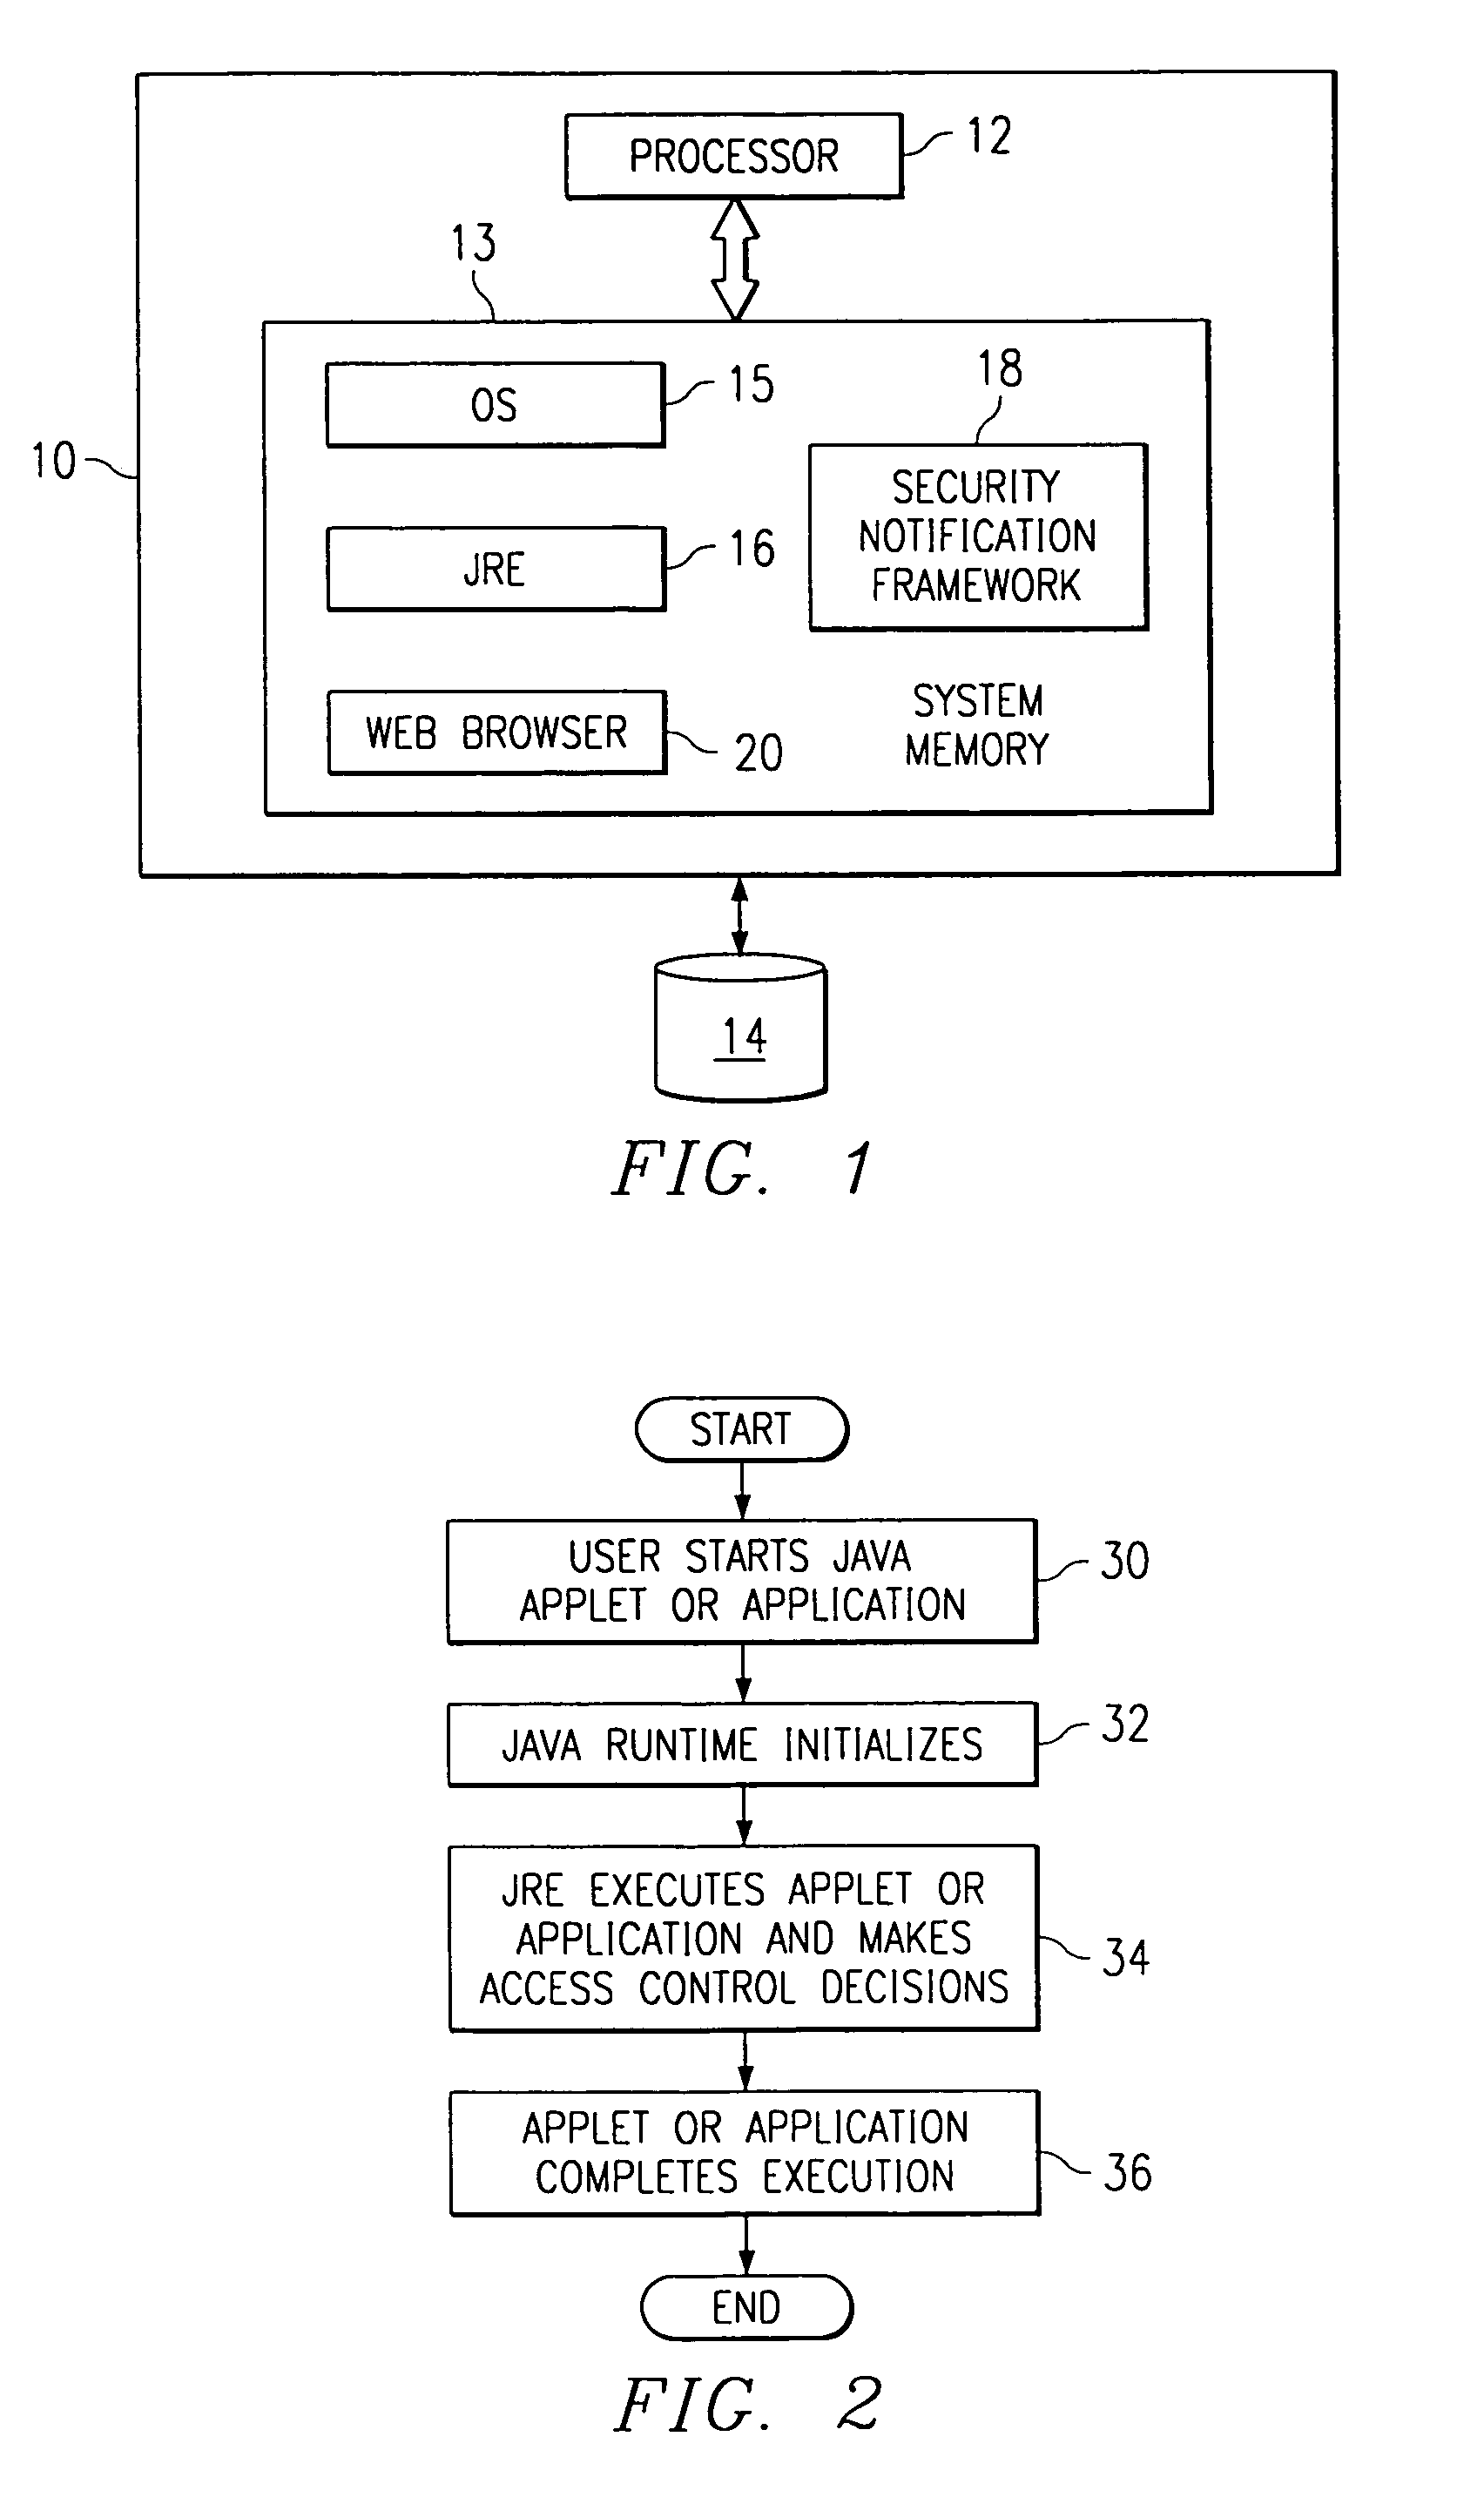 Notification of modifications to a trusted computing base